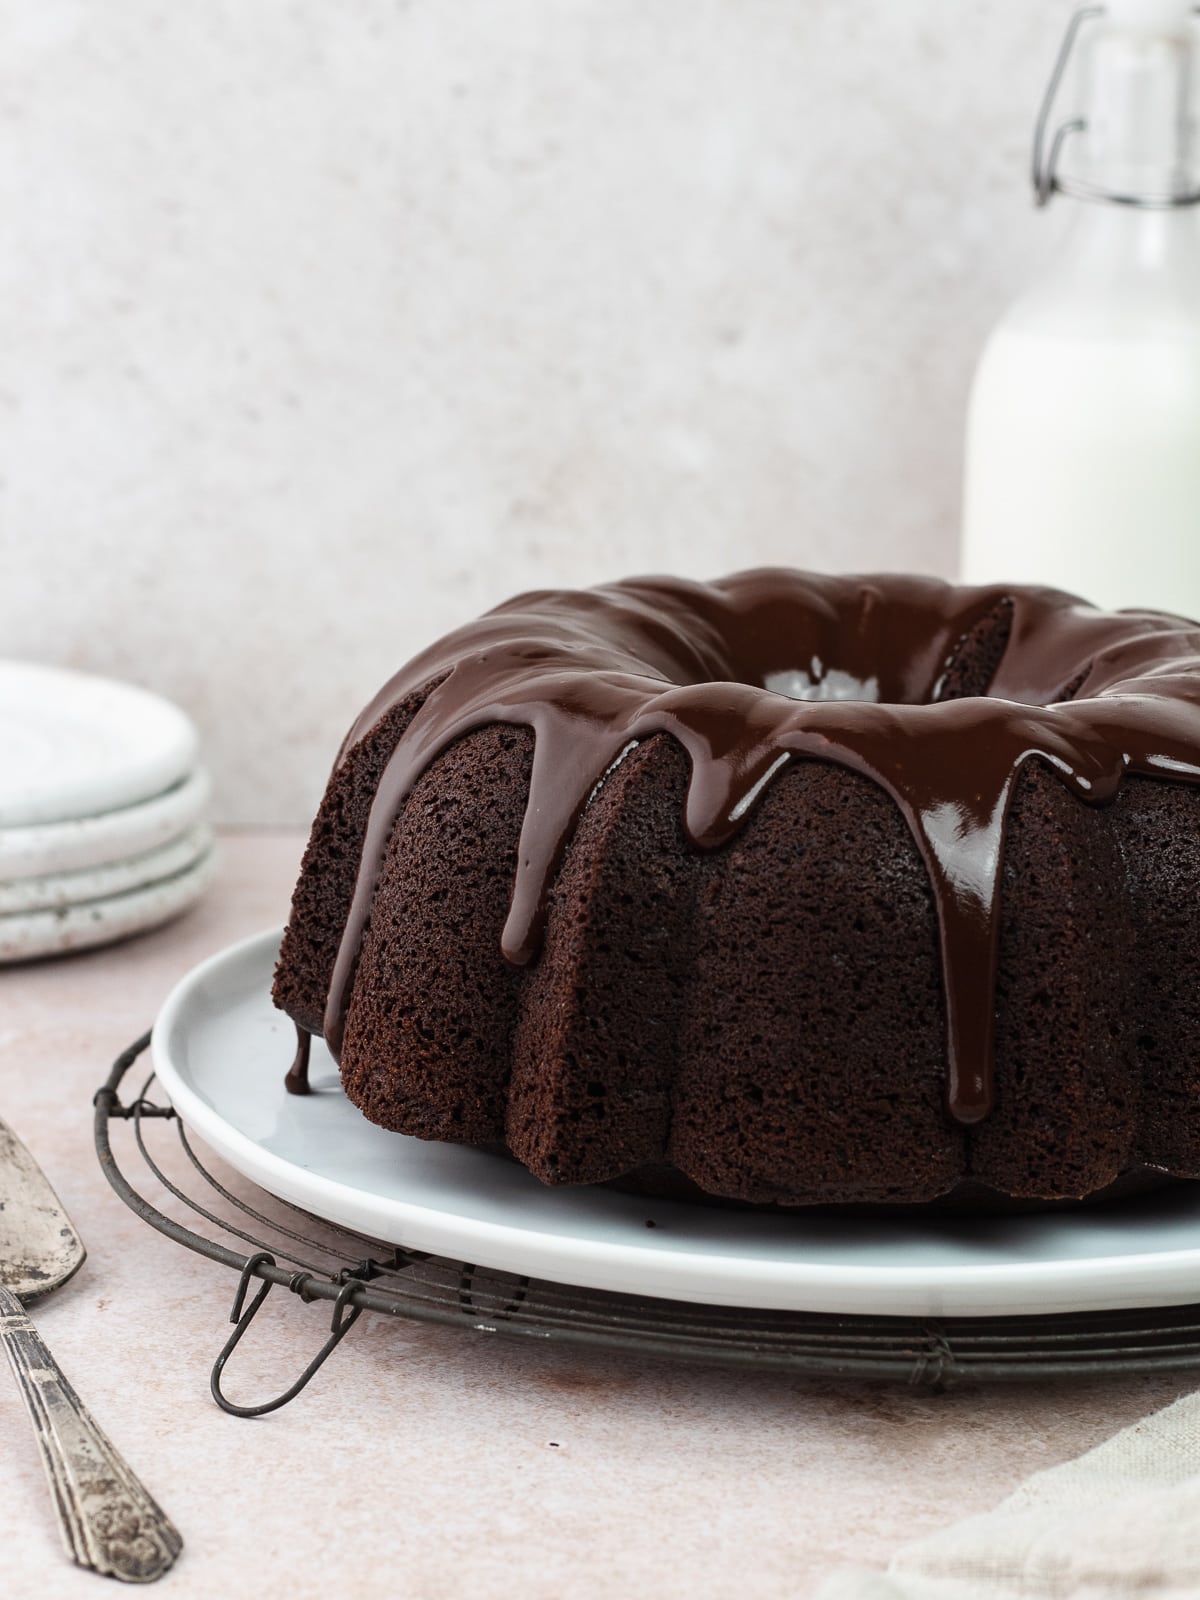 Chocolate olive oil bundt cake with chocolate ganache on a plate